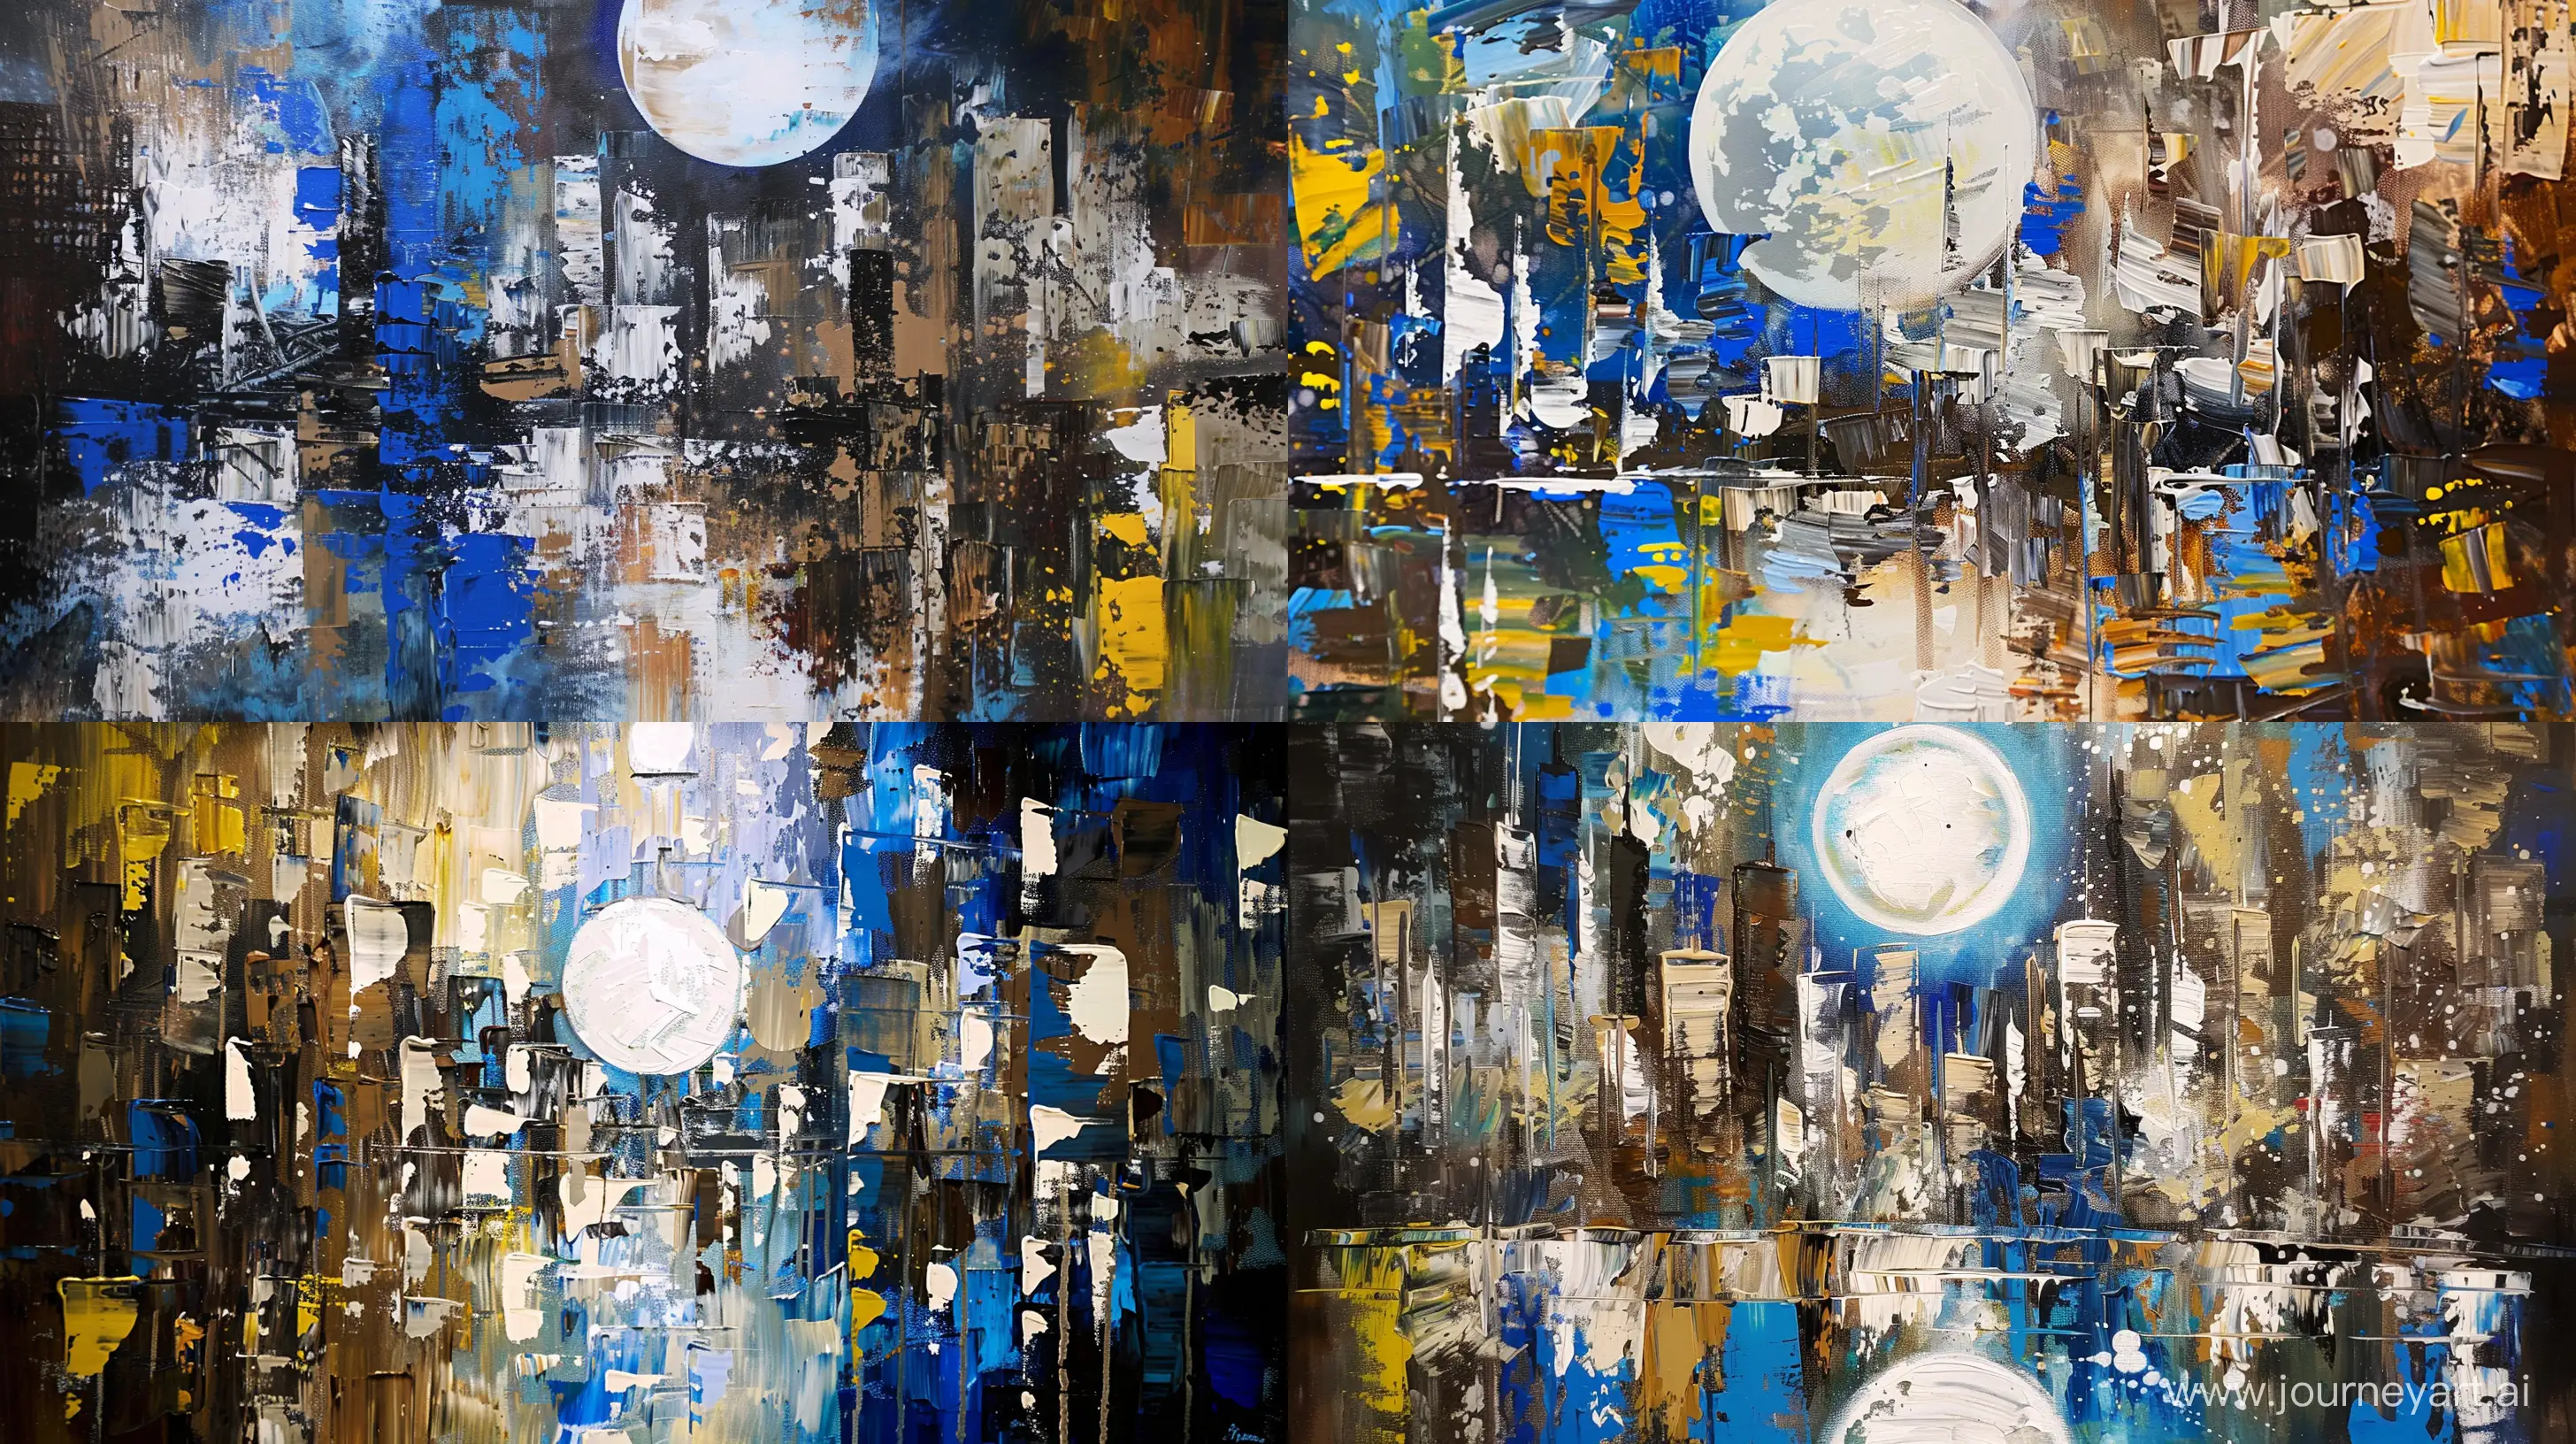  a vibrant and dynamic painting that captures the essence of a bustling cityscape at night. The scene should be illuminated by the ethereal glow of a full moon. The painting should be rich in texture, with thick, expressive brushstrokes that bring the scene to life. The buildings should be abstractly represented with various hues of blue, white, yellow, and brown paint. There should be reflections in what appears to be water in the foreground, painted with strokes of blue, white, and yellow capturing the moon’s reflection. The overall mood conveyed should be one of mystery and enchantment due to the combination of dark tones with bright moonlight --ar 16:9 --v 6.0